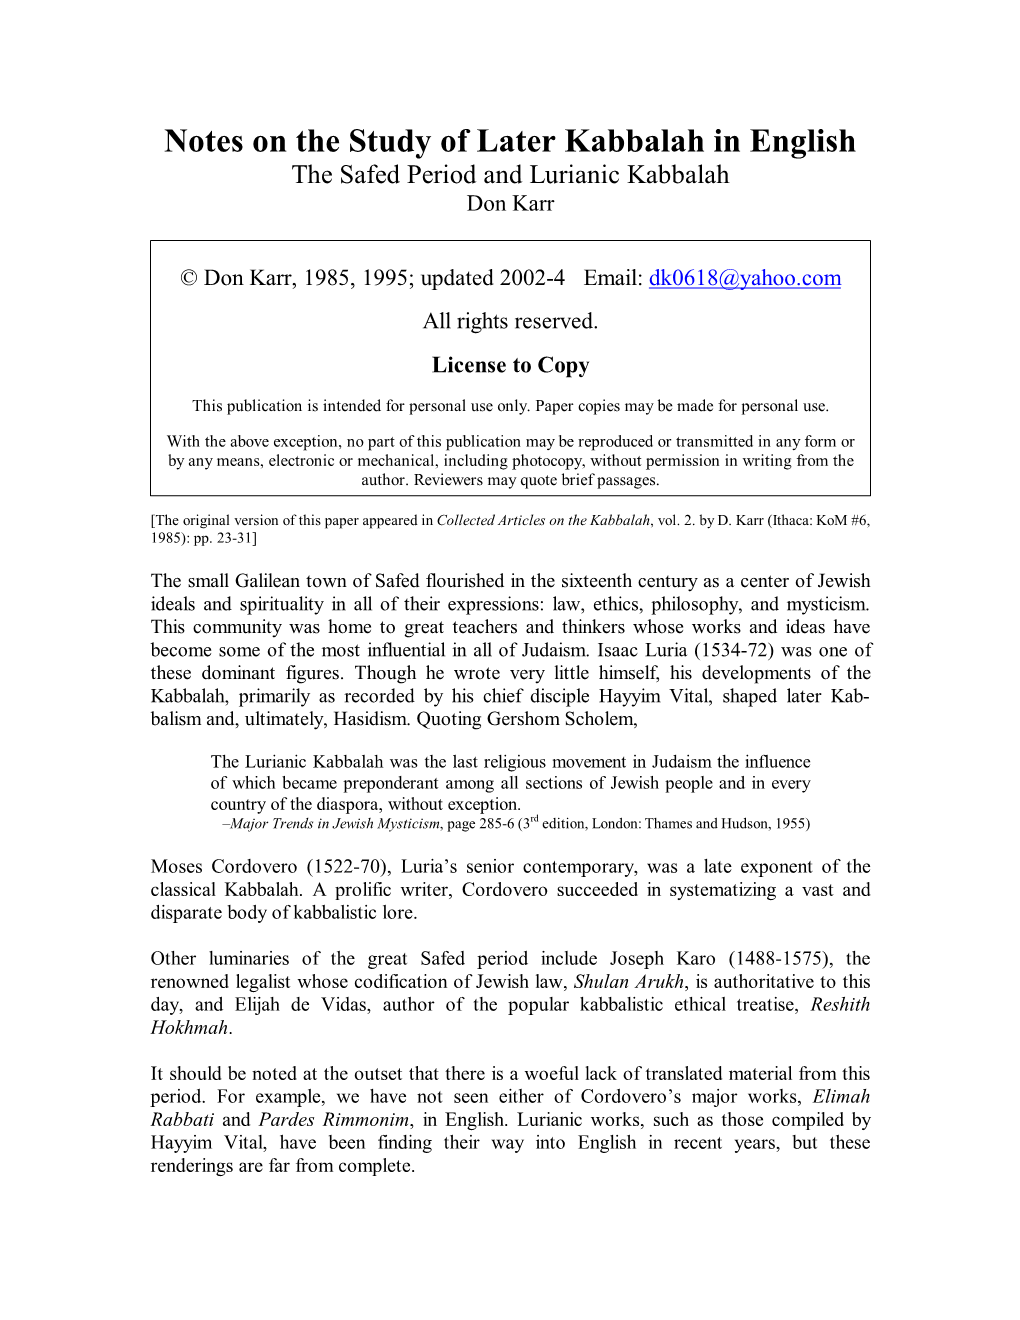 Notes on the Study of Later Kabbalah in English the Safed Period and Lurianic Kabbalah Don Karr